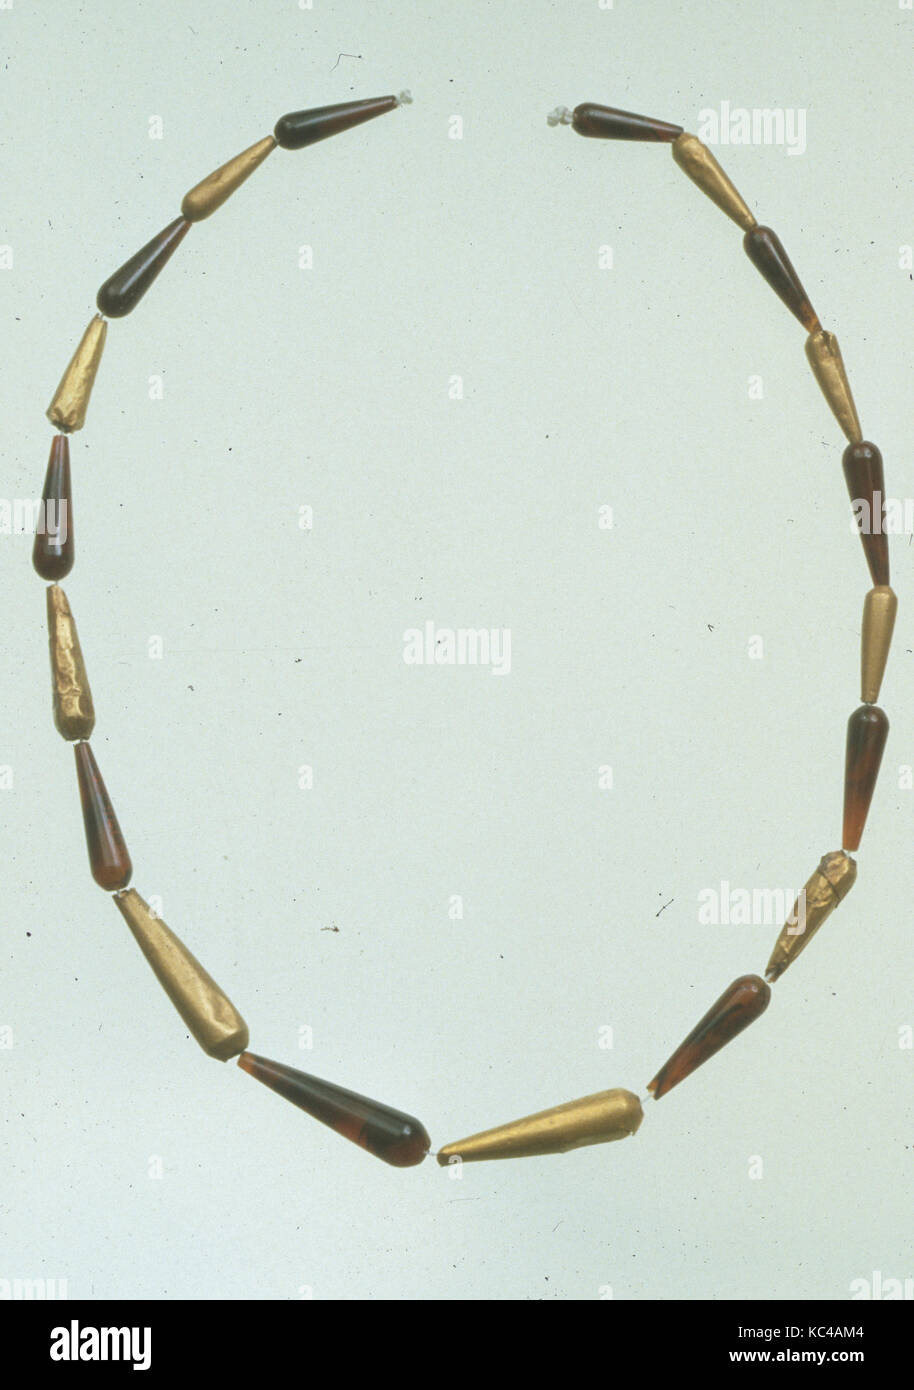 Nineteen Drop Beads here Strung as a Necklace, ca. 1648–1540 B.C Stock Photo